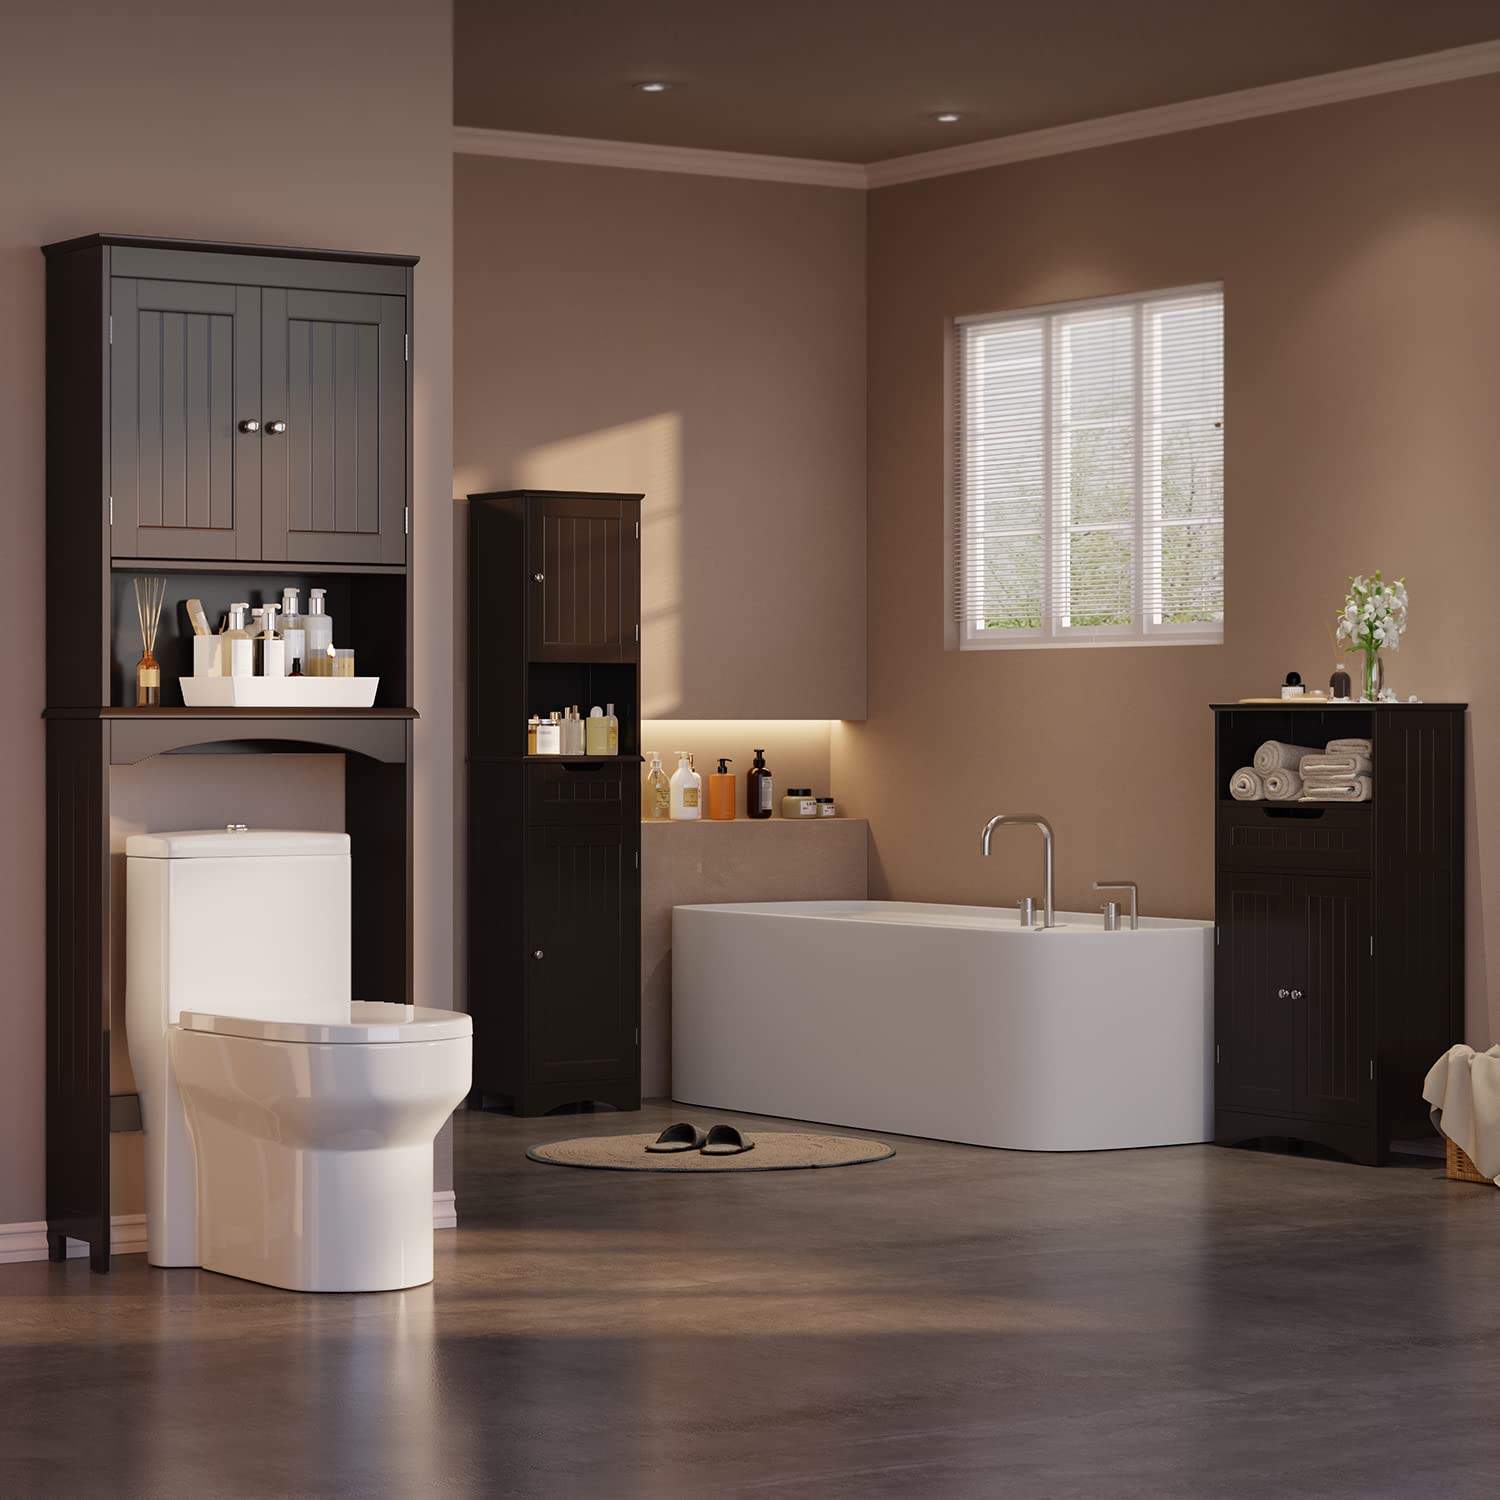 Gizoon AP12 Over The Toilet Storage Cabinet with Adjustable Shelf and Double Doors Wooden Rack